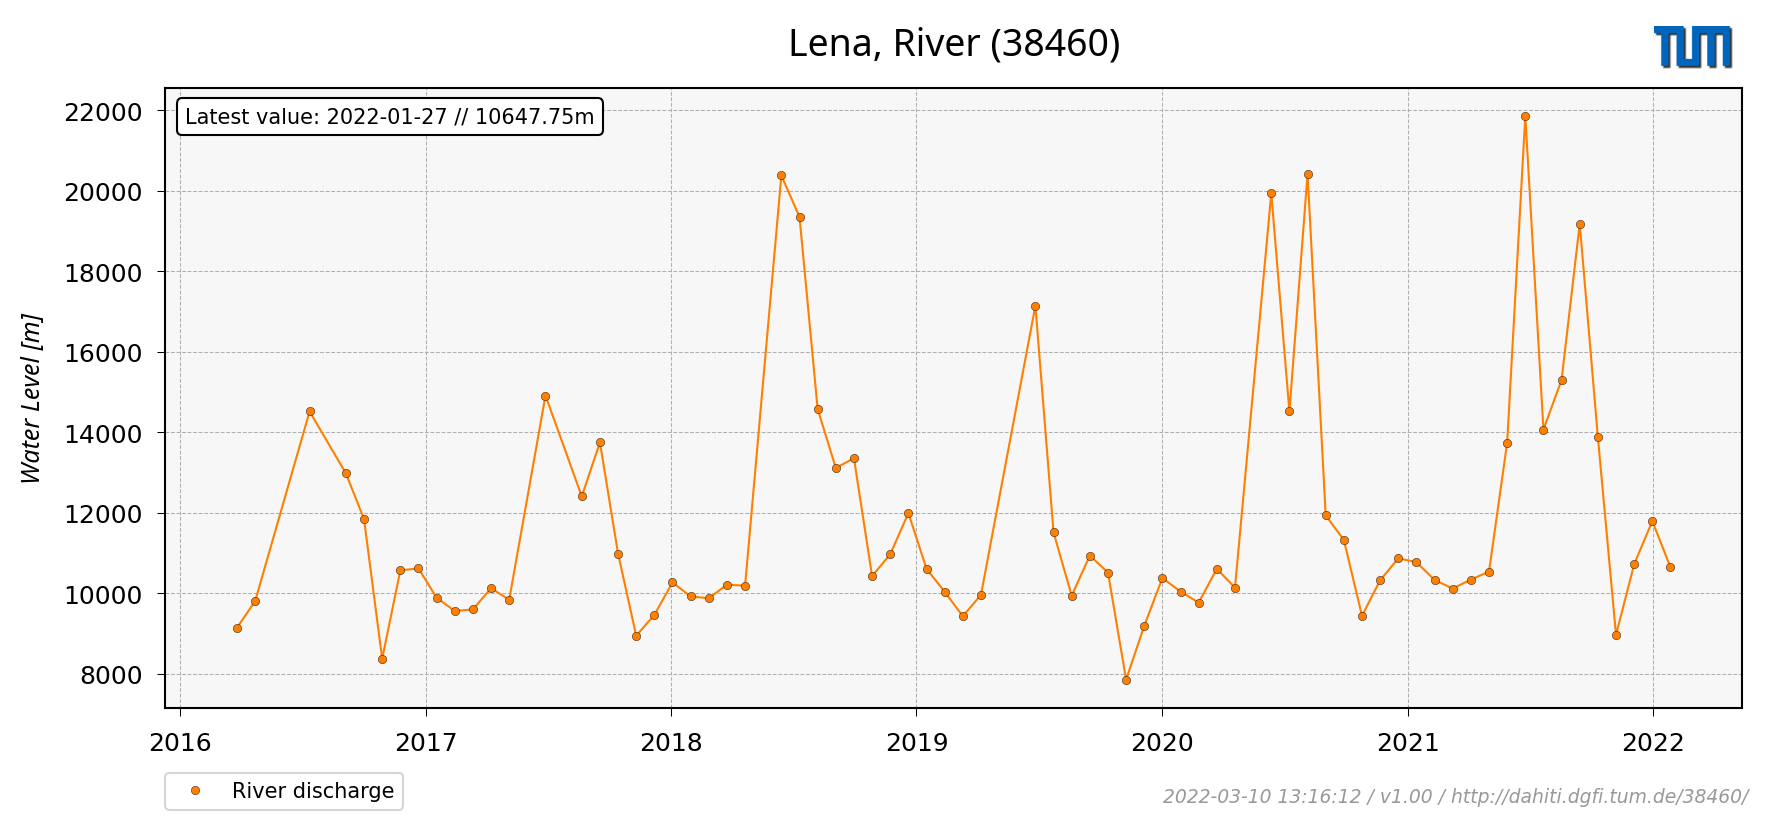 Example of River Discharge Time Series